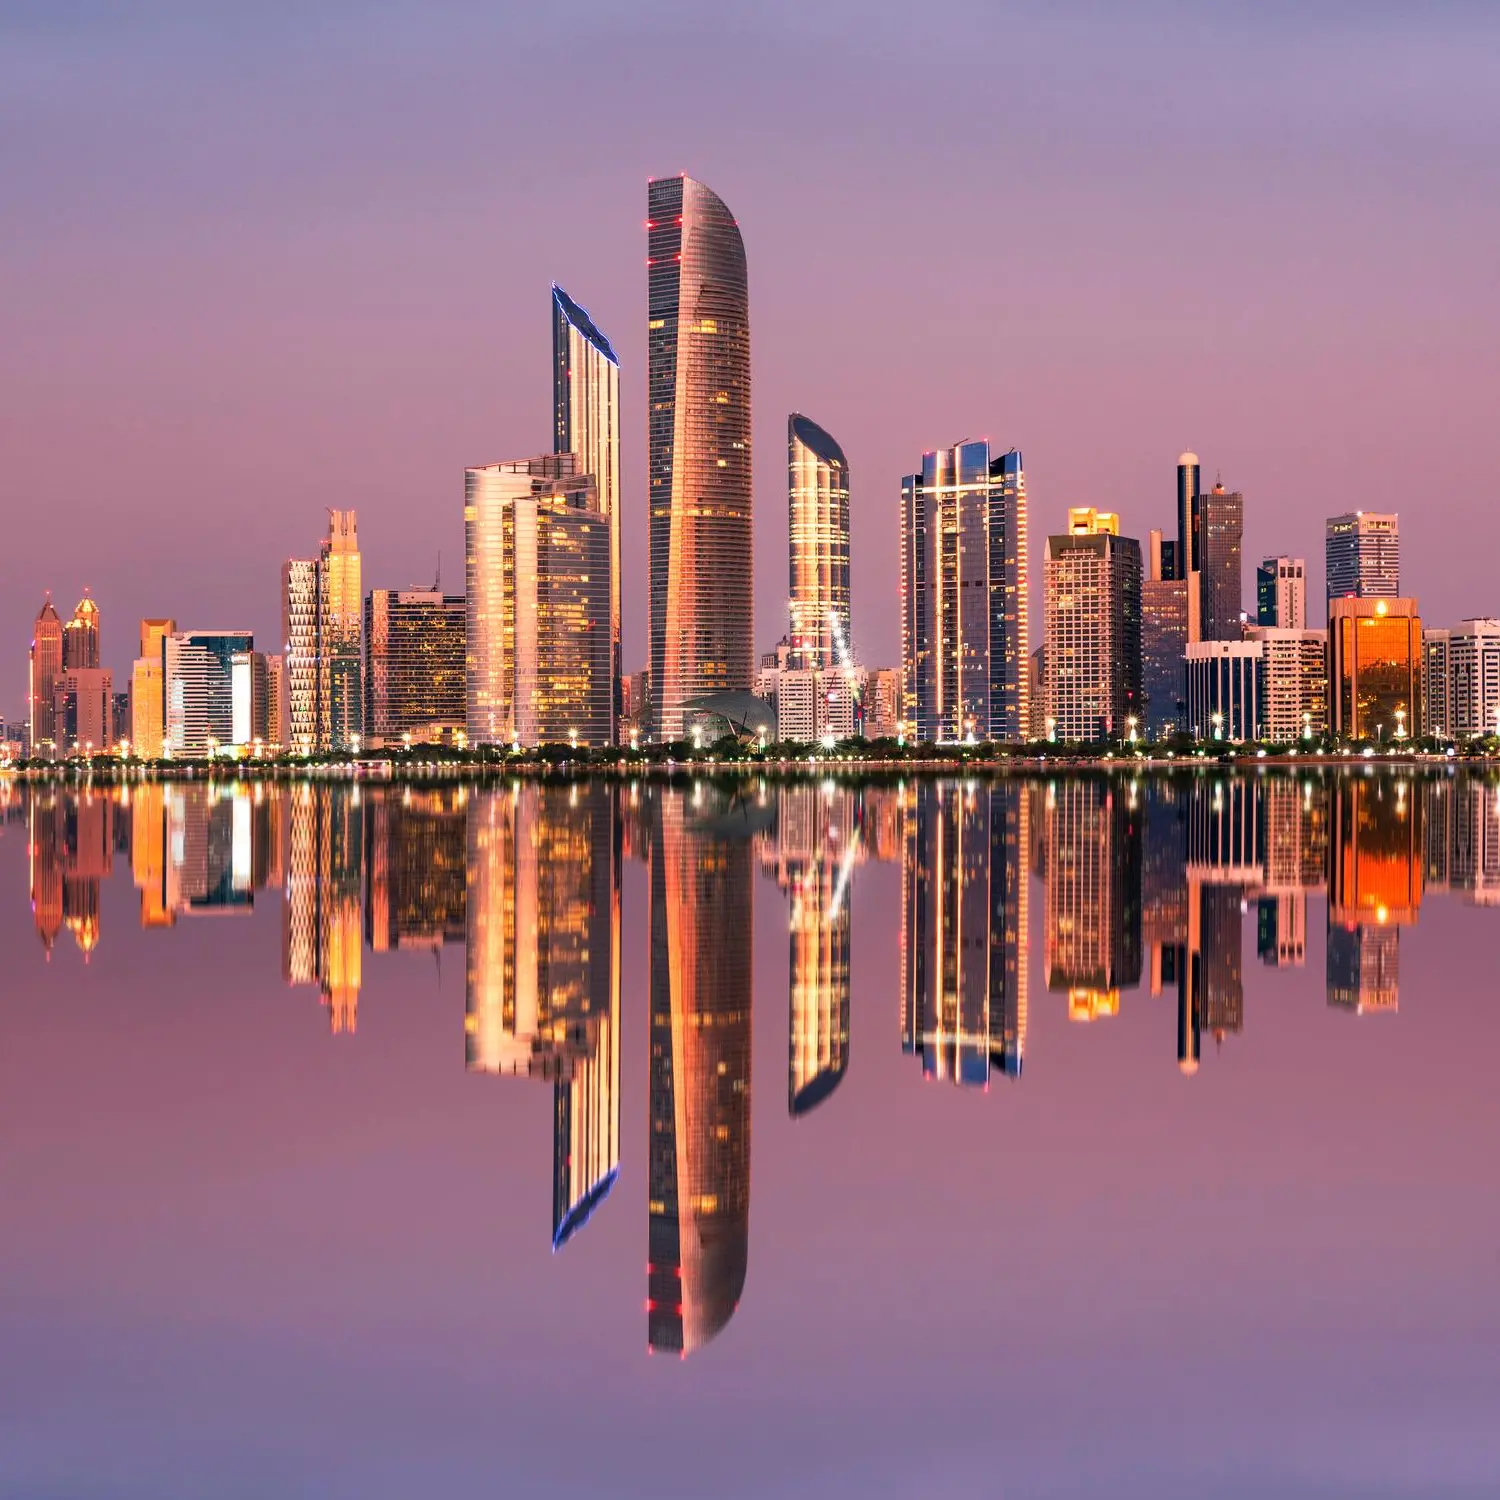 Abu Dhabi-based global centre launched to accelerate climate finance